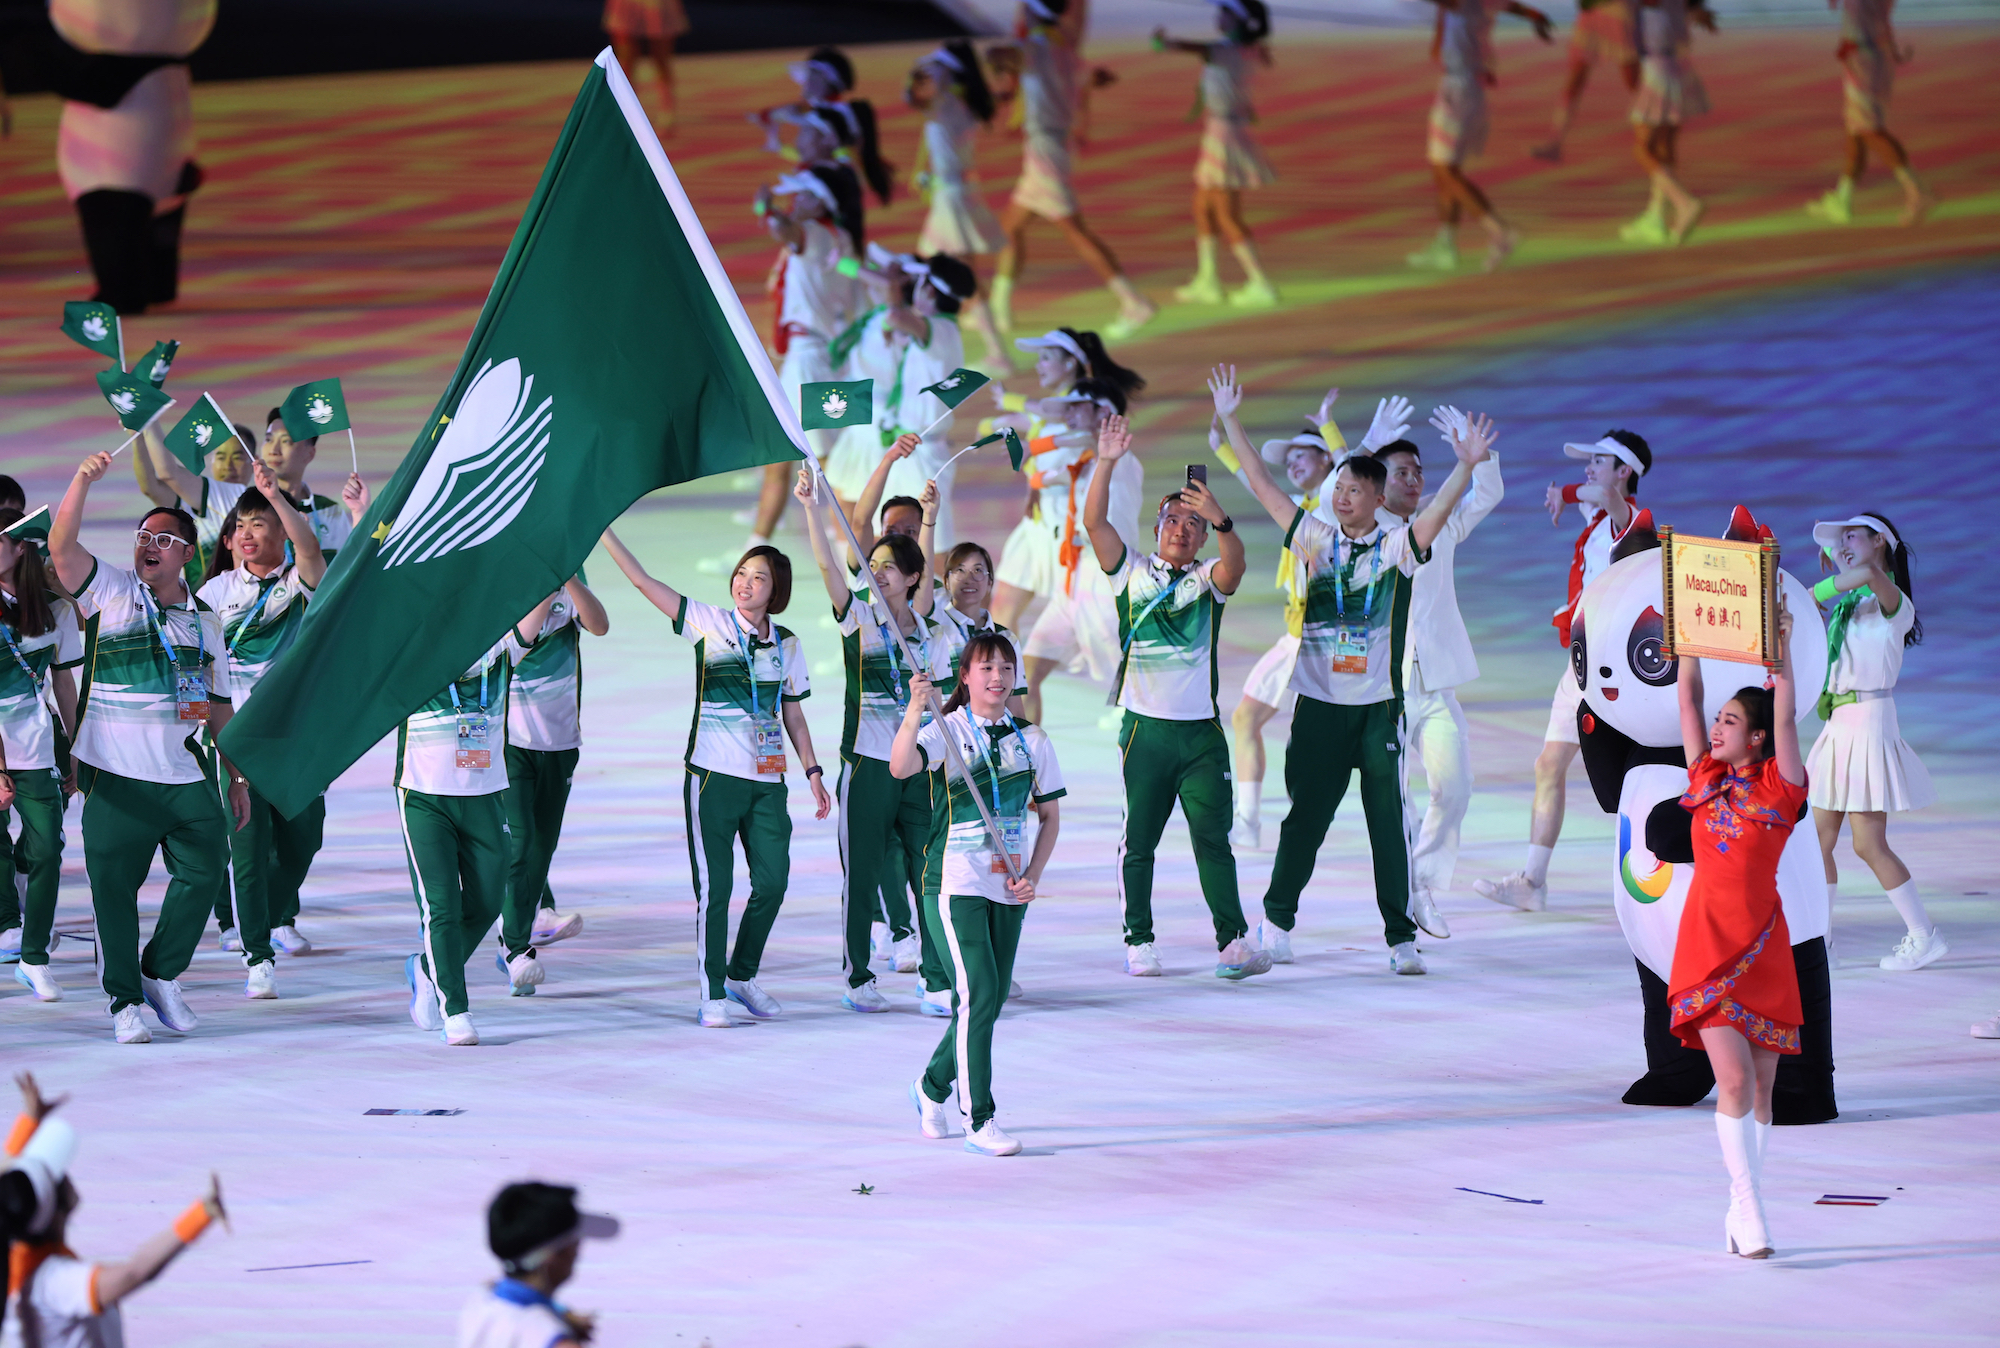 Members of the delegation of China’s Macao march during the opening ceremony of the 31st FISU Summer World University Games in Chengdu